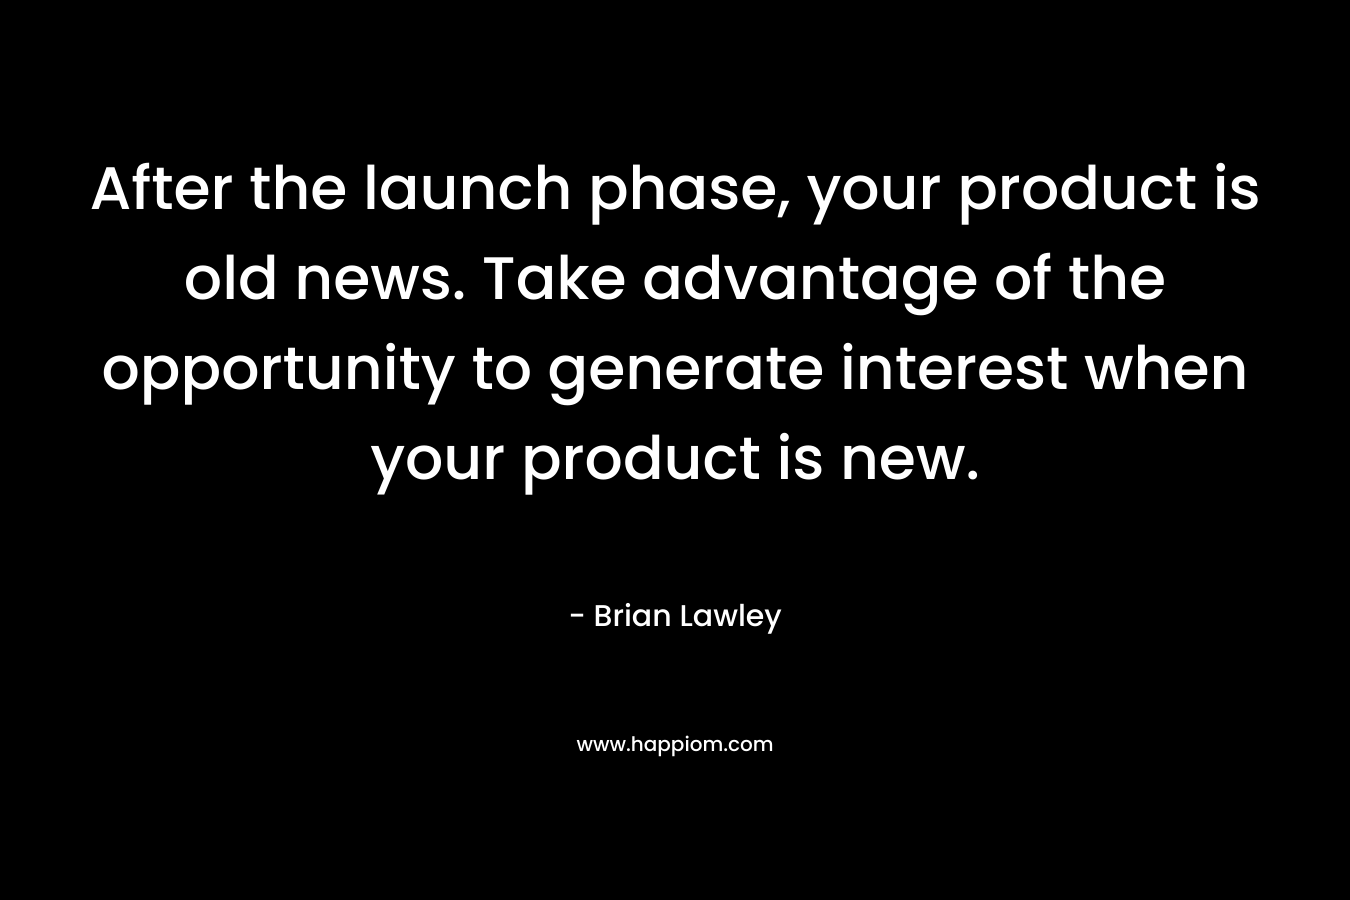 After the launch phase, your product is old news. Take advantage of the opportunity to generate interest when your product is new. – Brian Lawley